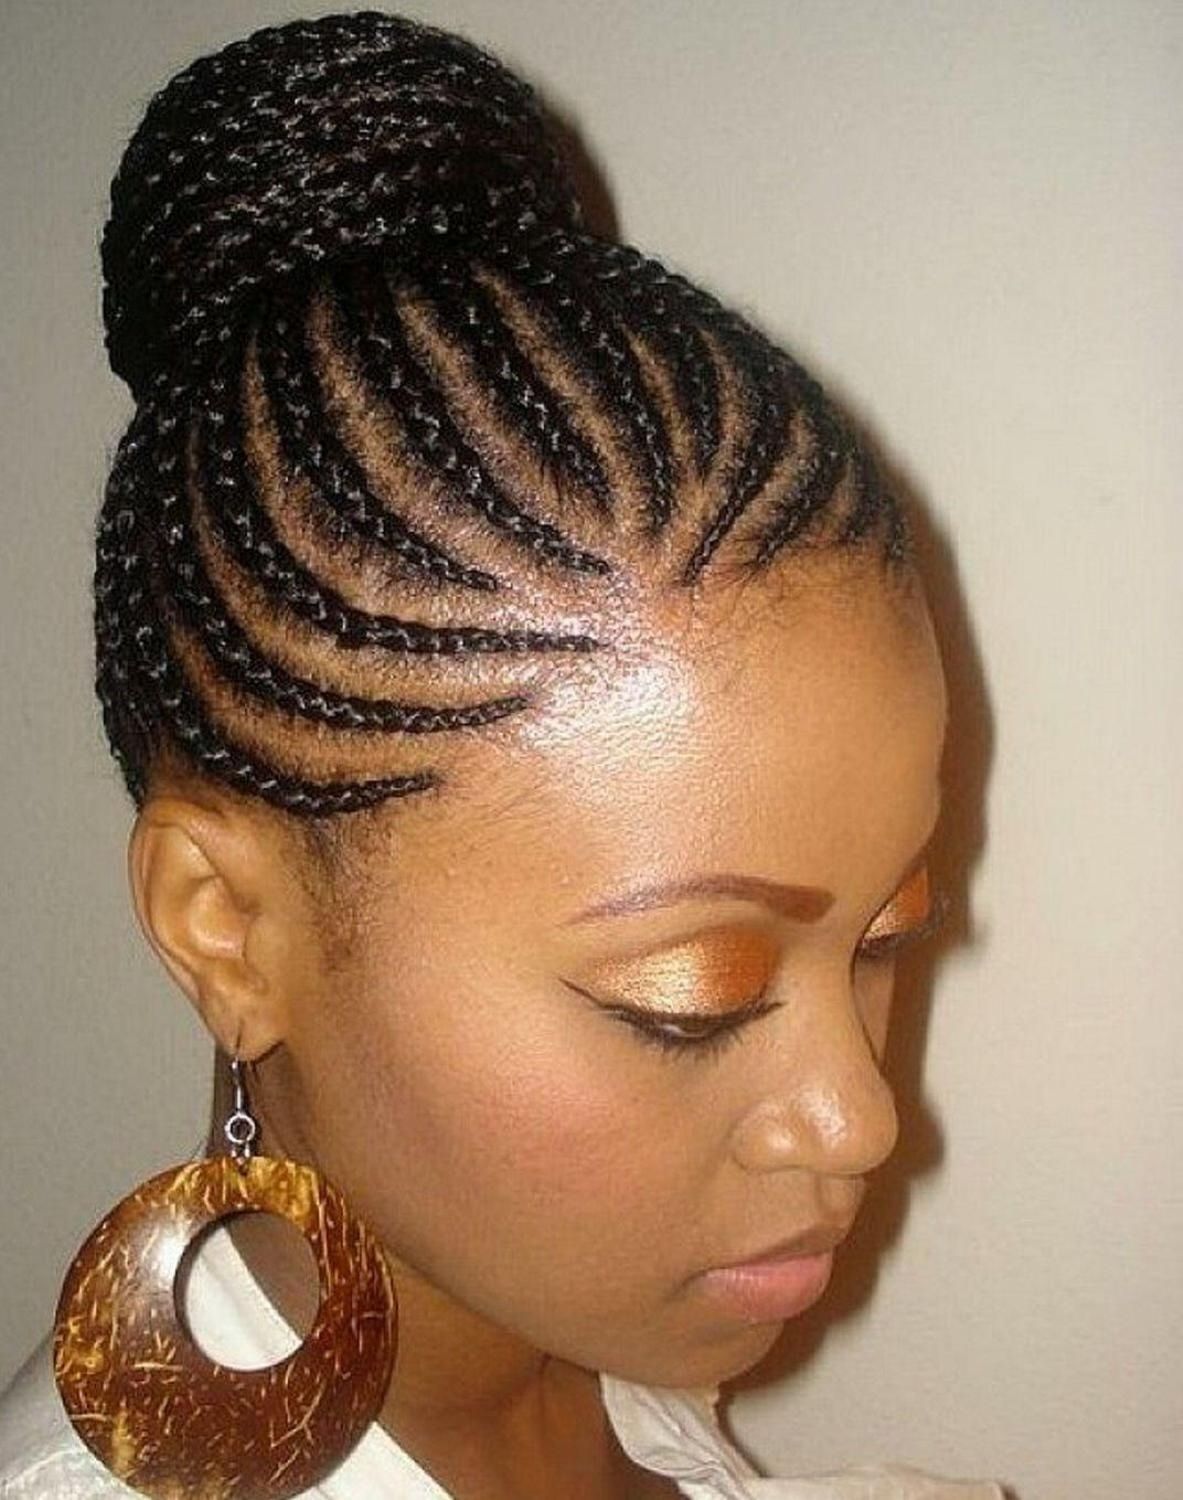 Photo: African Braid Updo Hairstyles Braided Updo Hairstyles For Intended For Urban Updo Hairstyles (View 8 of 15)